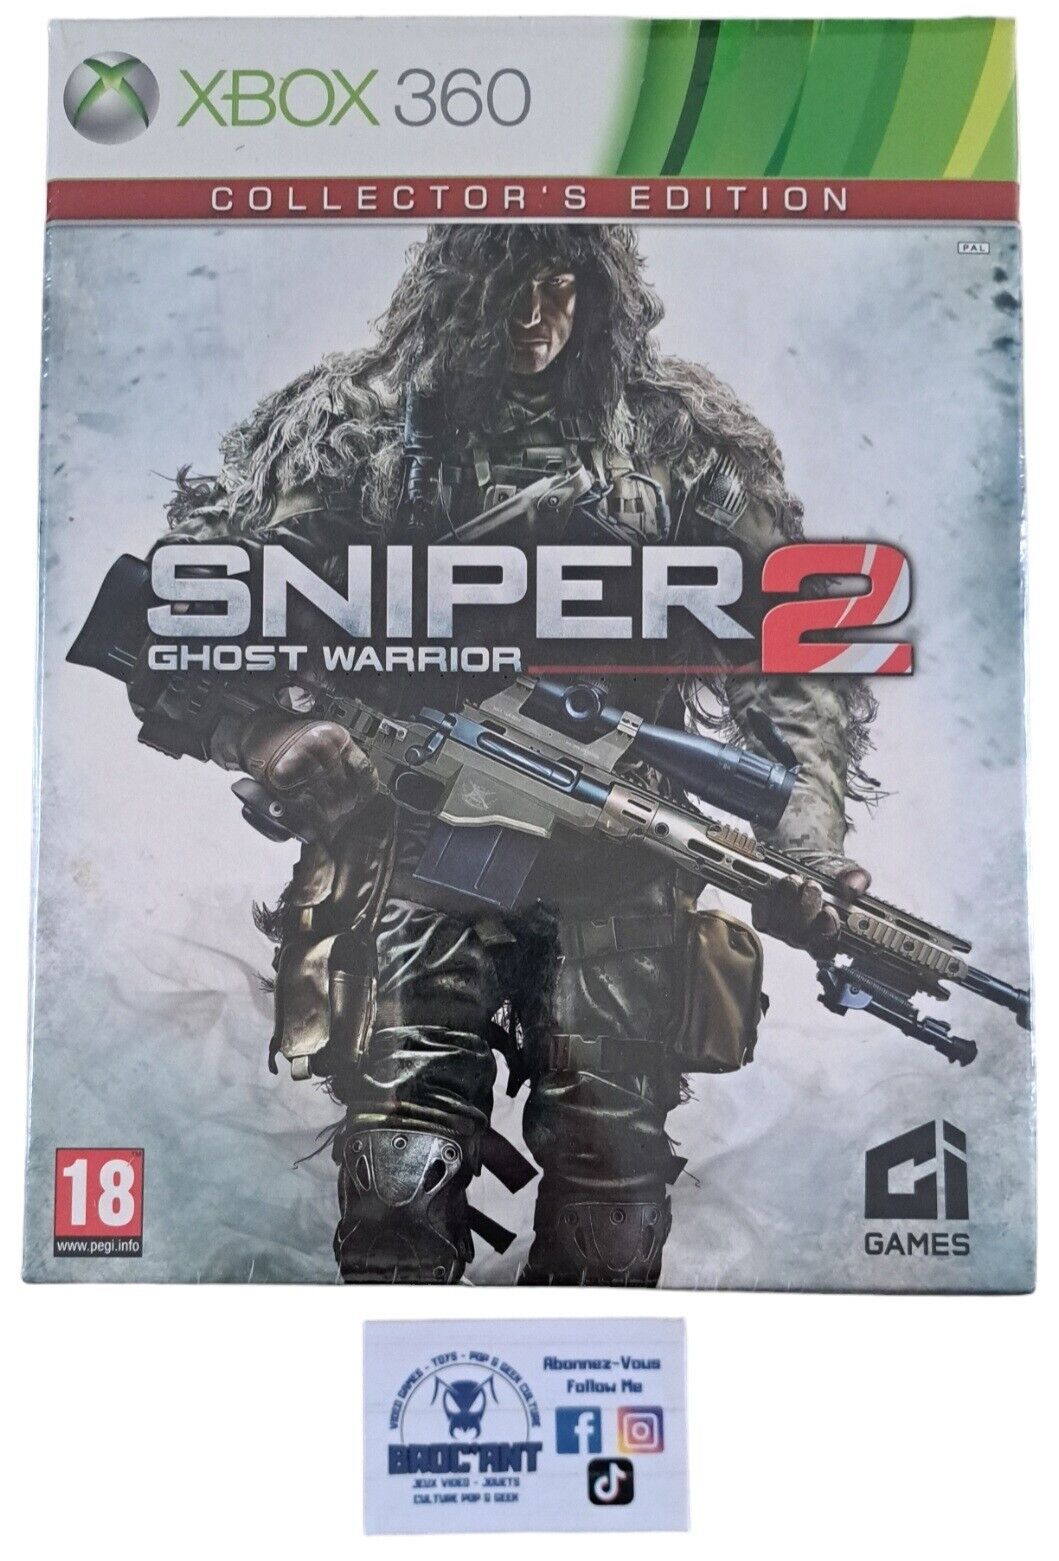 Sniper Ghost Warrior 2 collector 's edition Microsoft Xbox 360 sealed